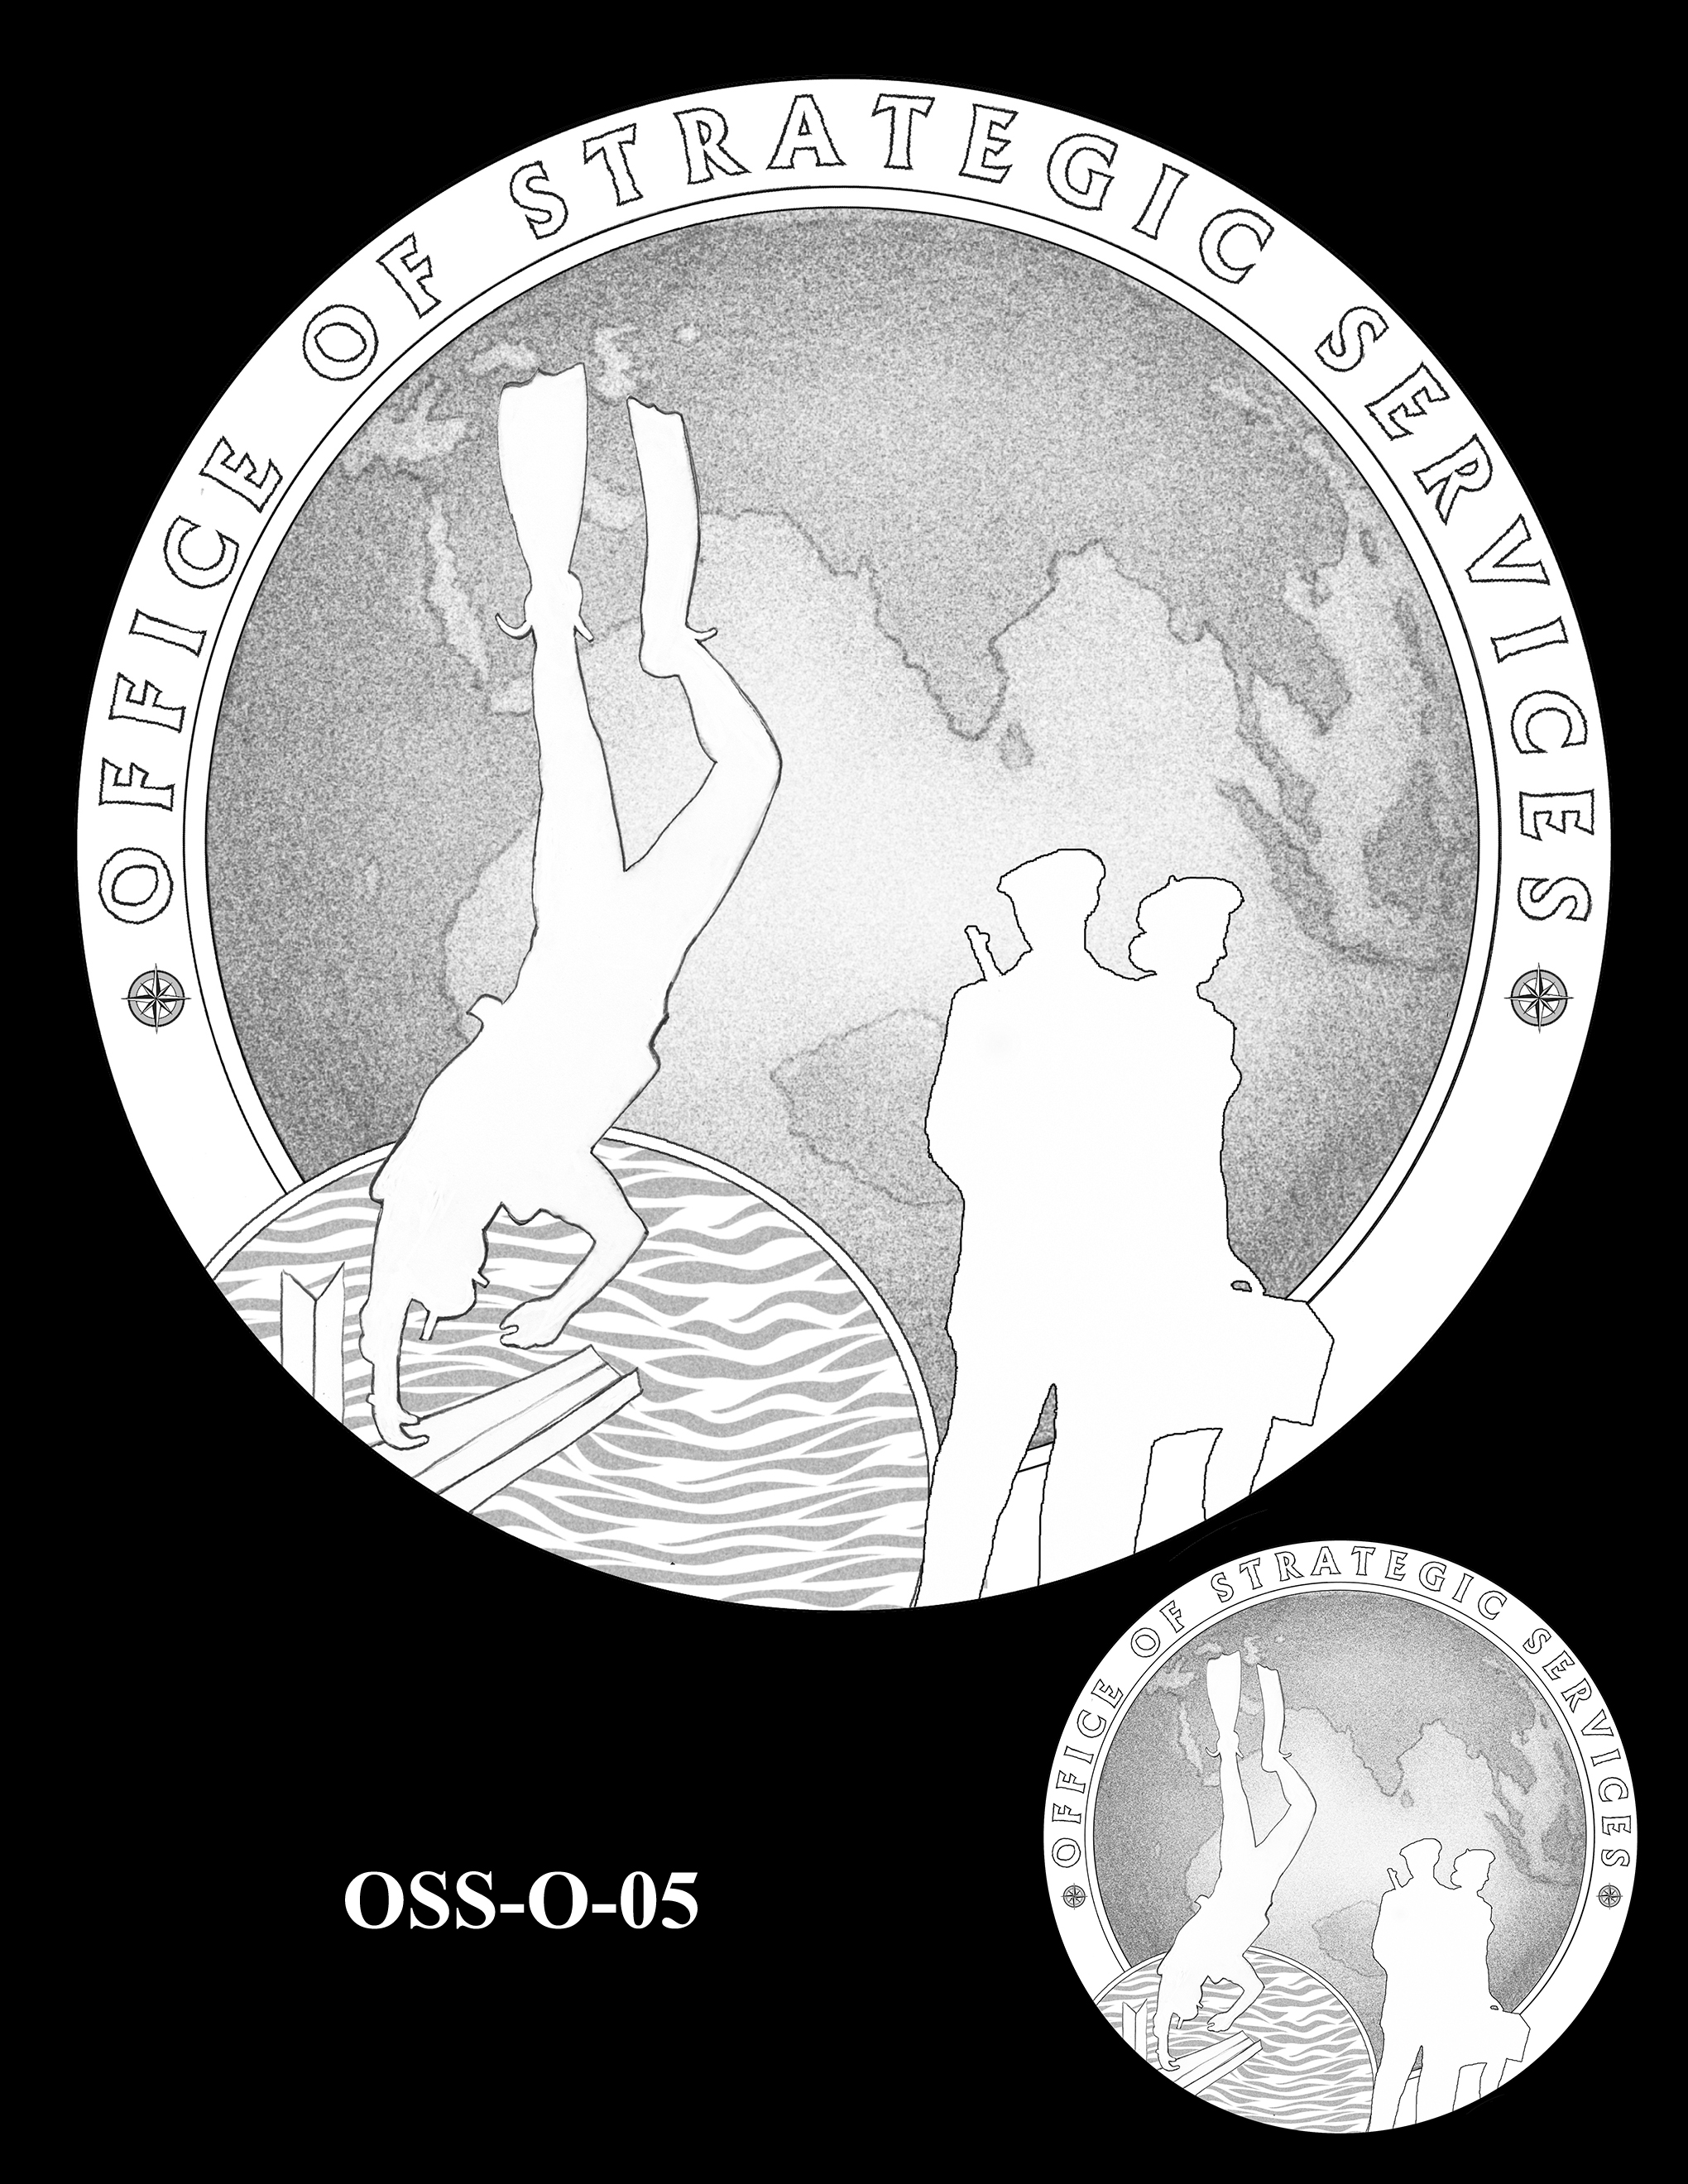 OSS-O-05 -- Office of Strategic Services Congressional Gold Medal